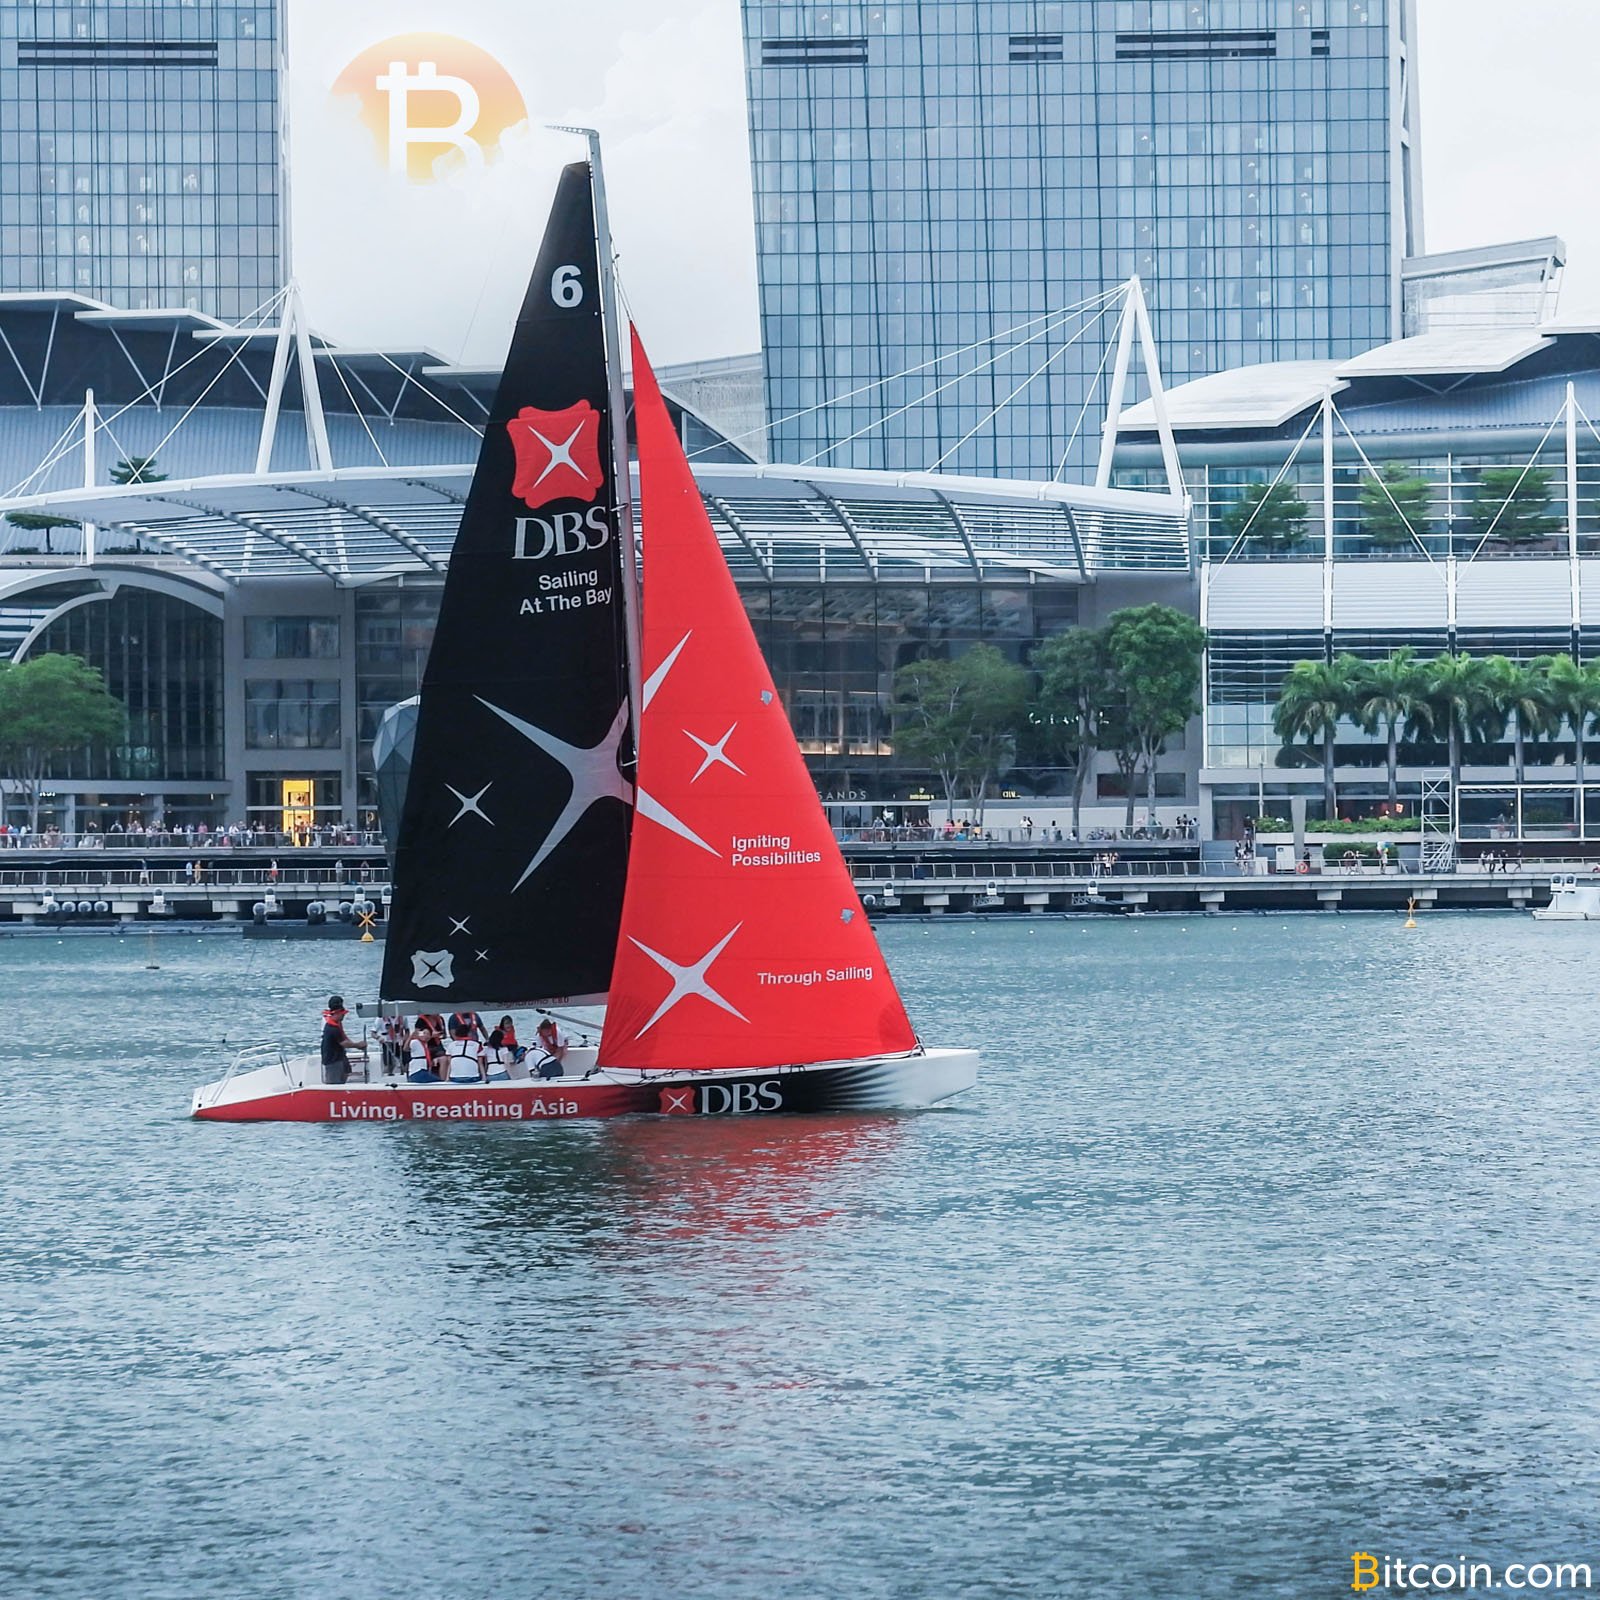 Singapore-Based Bitcoin Startups Deal With Bank Account Closures